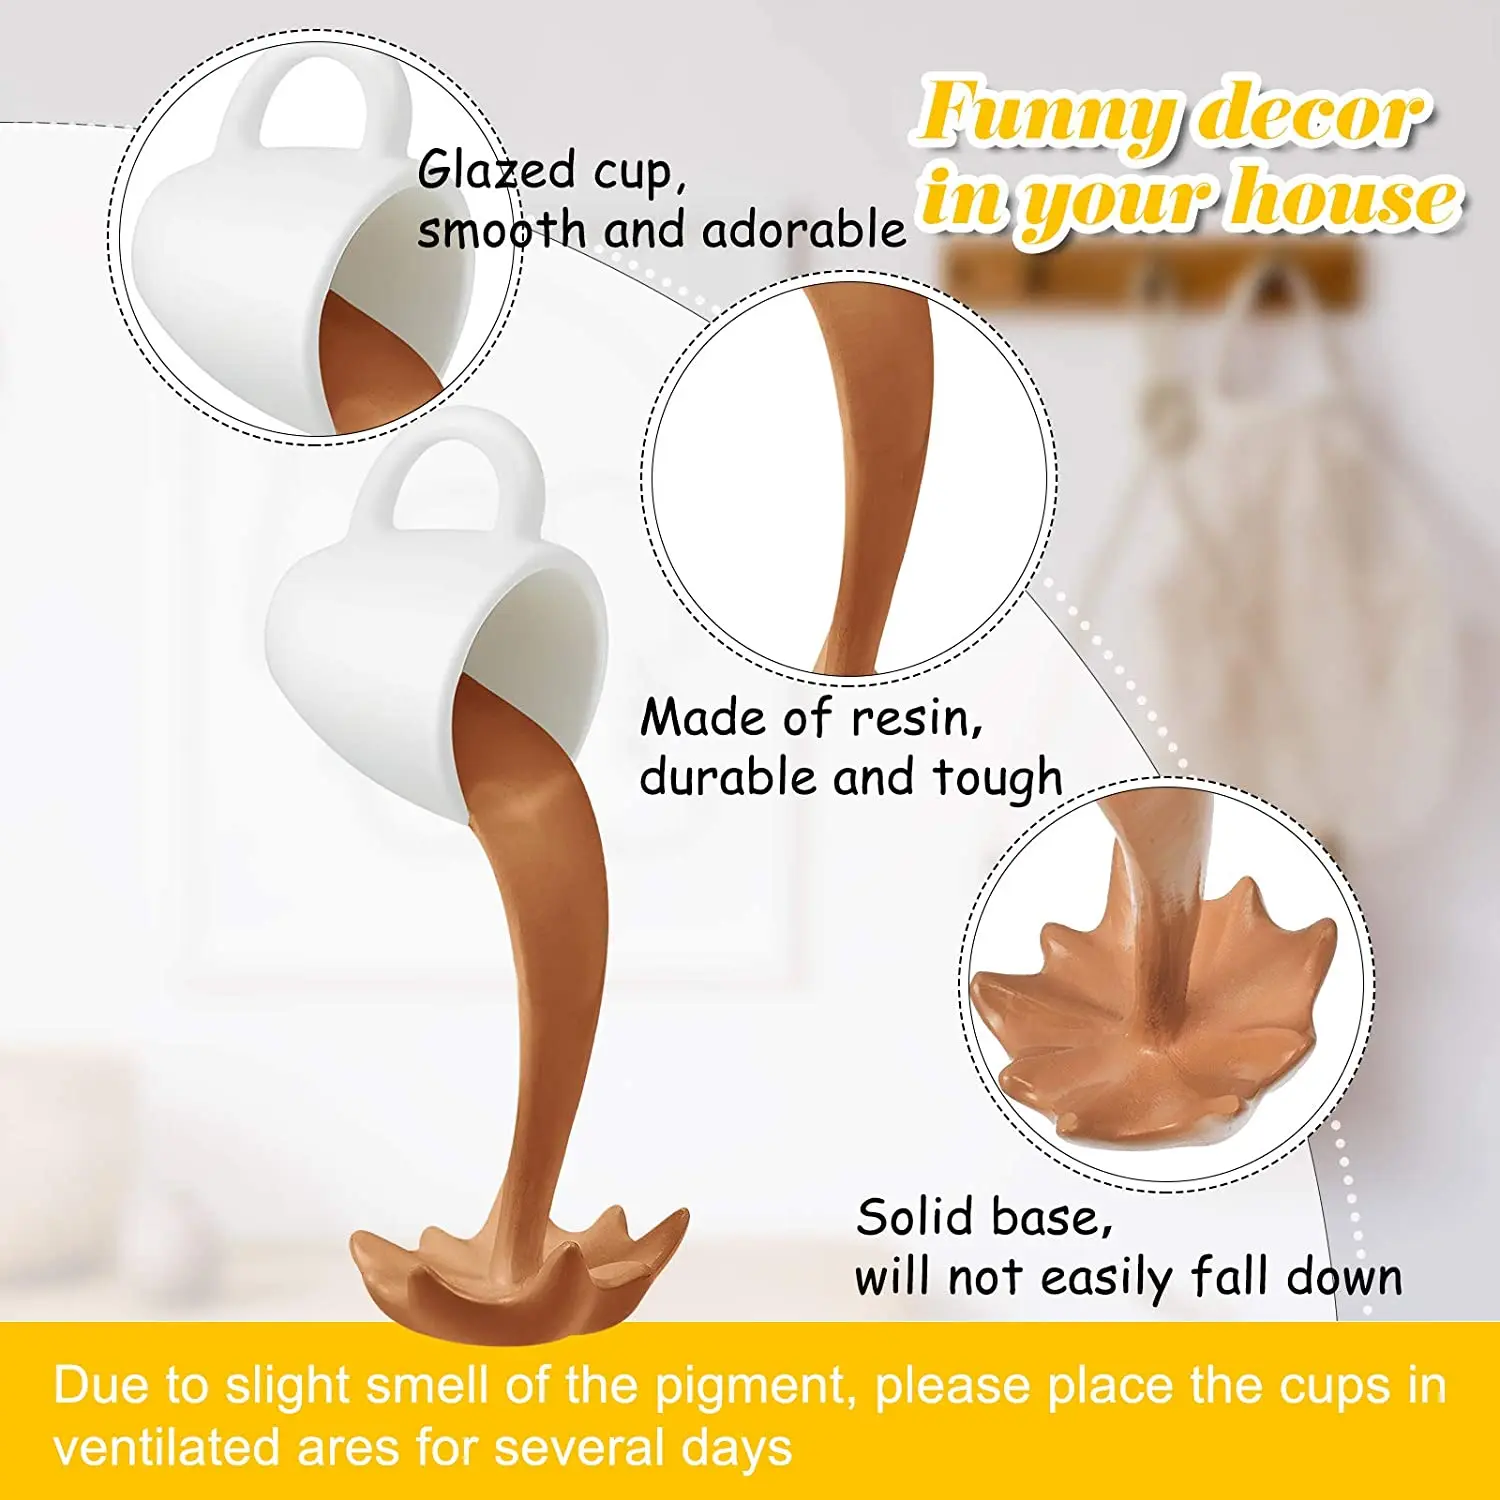 Floating Coffee Cup, Hanging Coffee Cup Holder Mug Resin 3d Stereo